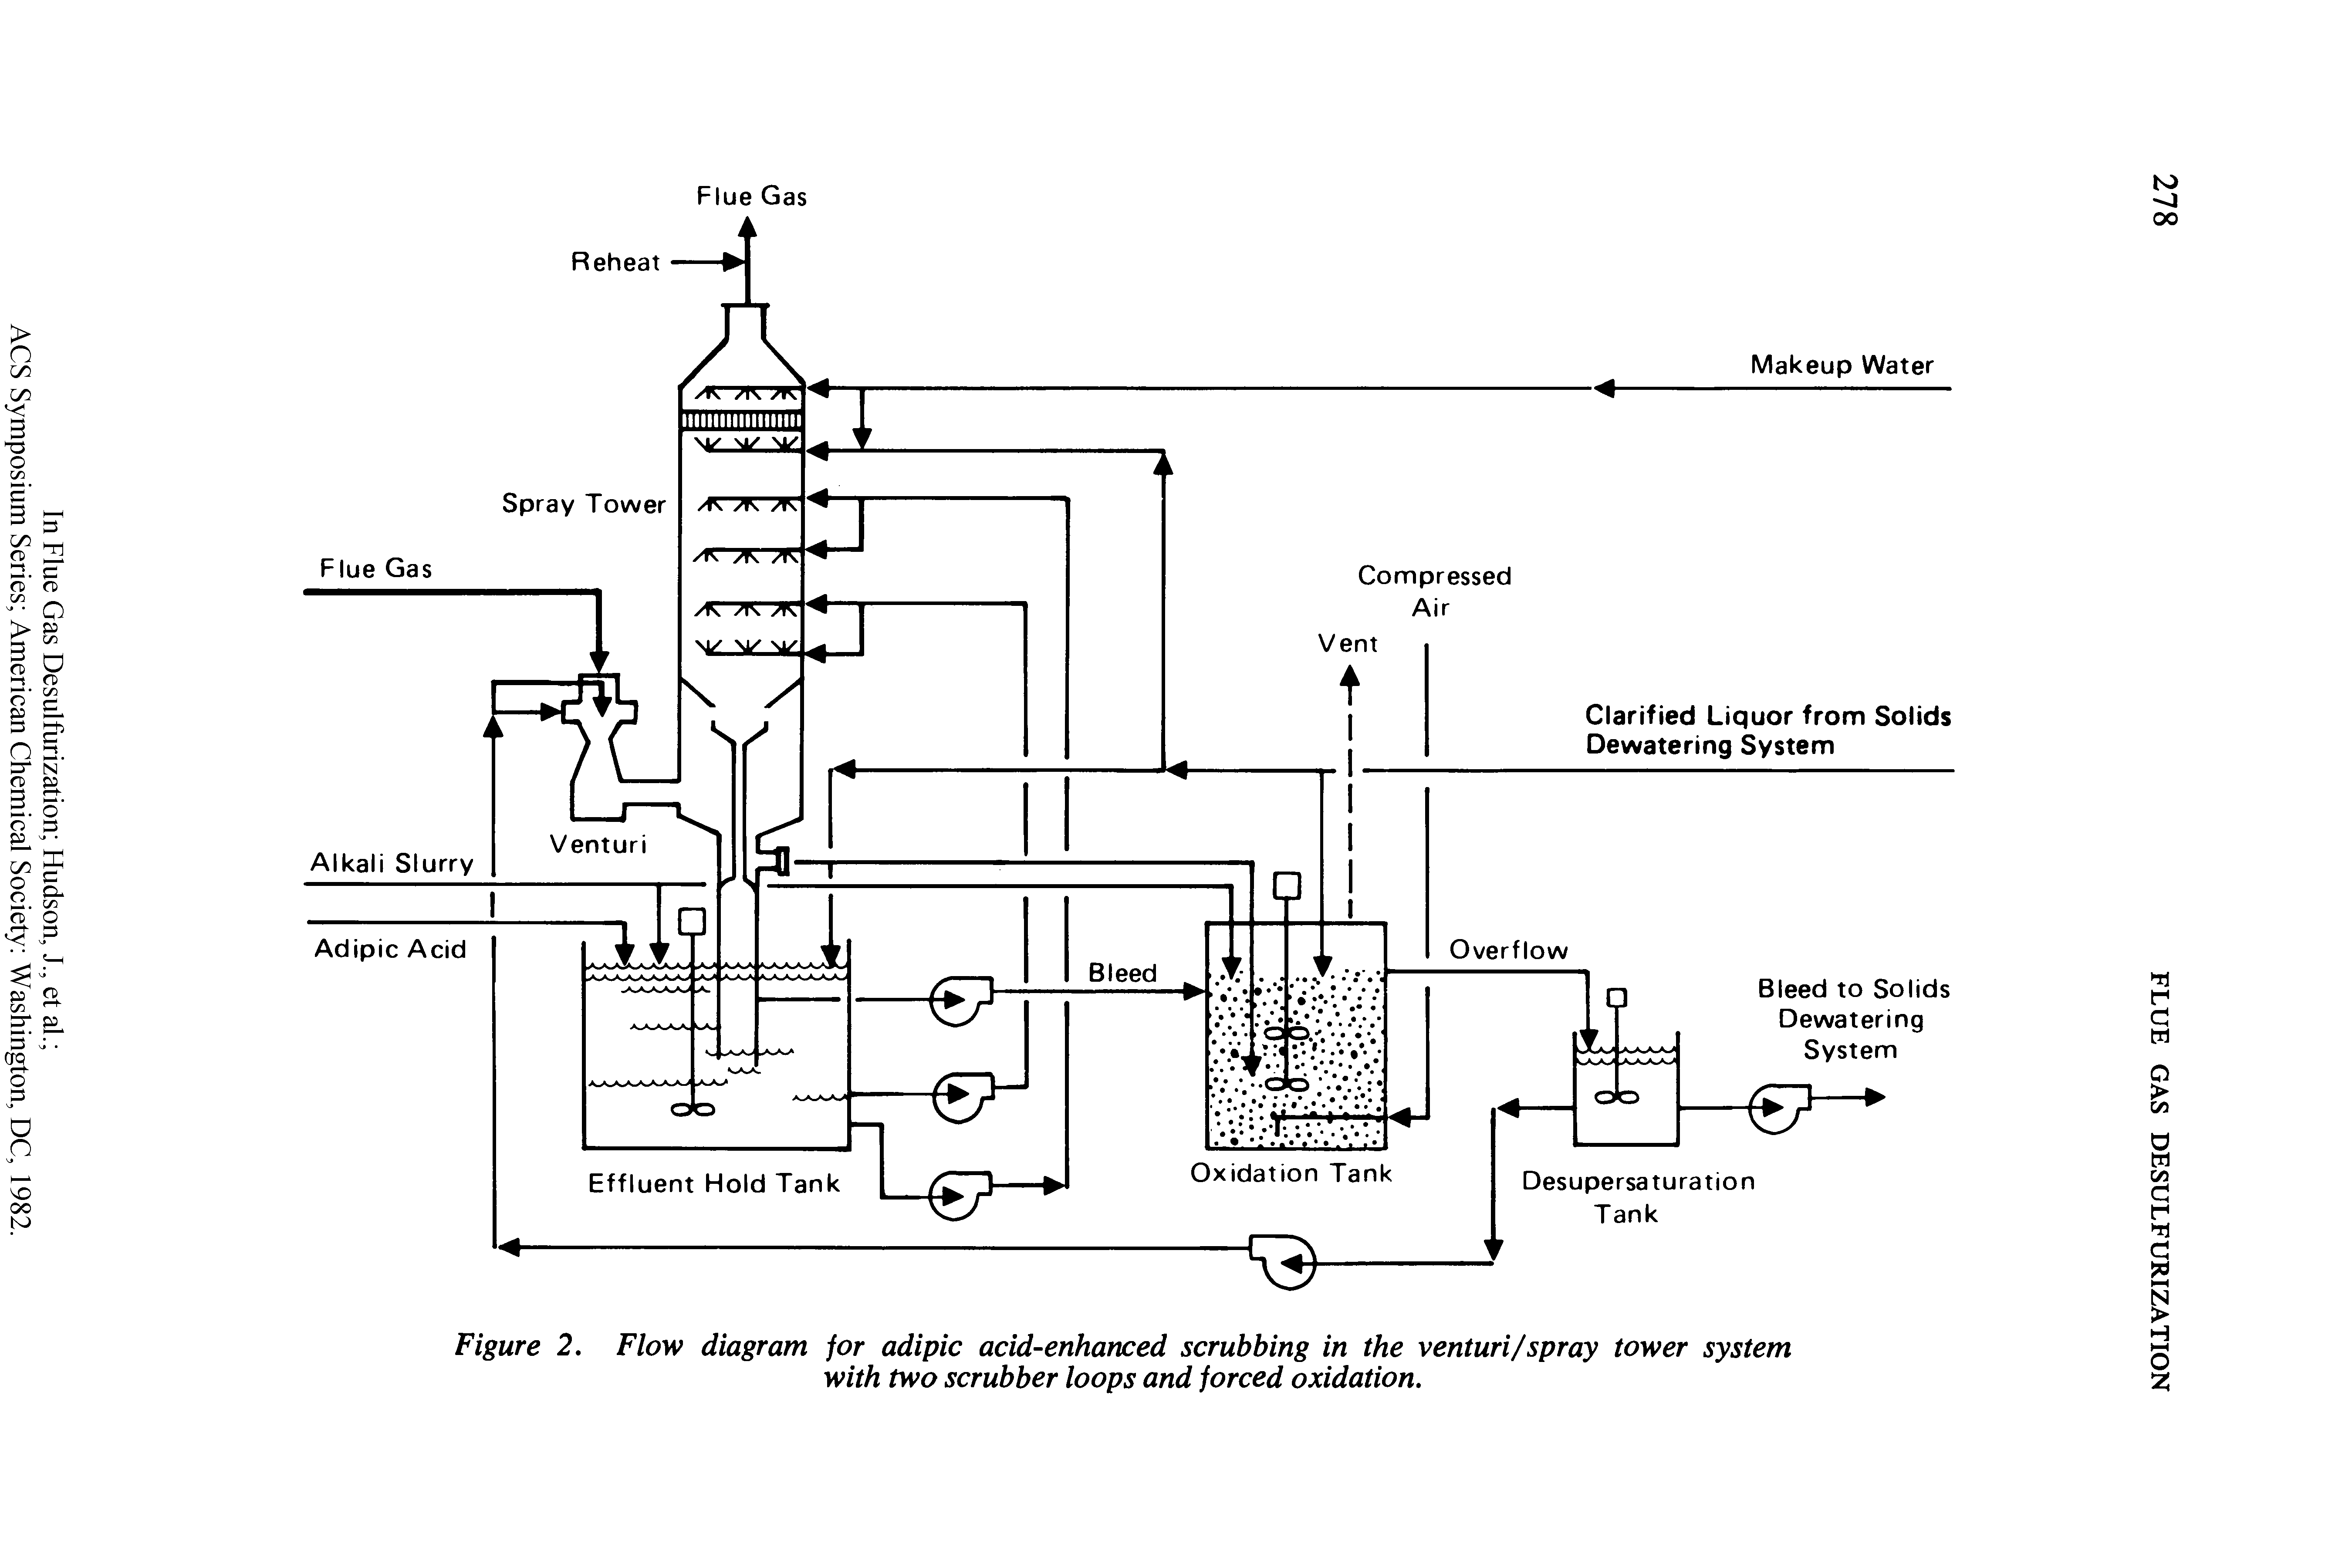 Figure 2. Flow diagram for adipic acid-enhanced scrubbing in the venturi/spray tower system with two scrubber loops and forced oxidation.